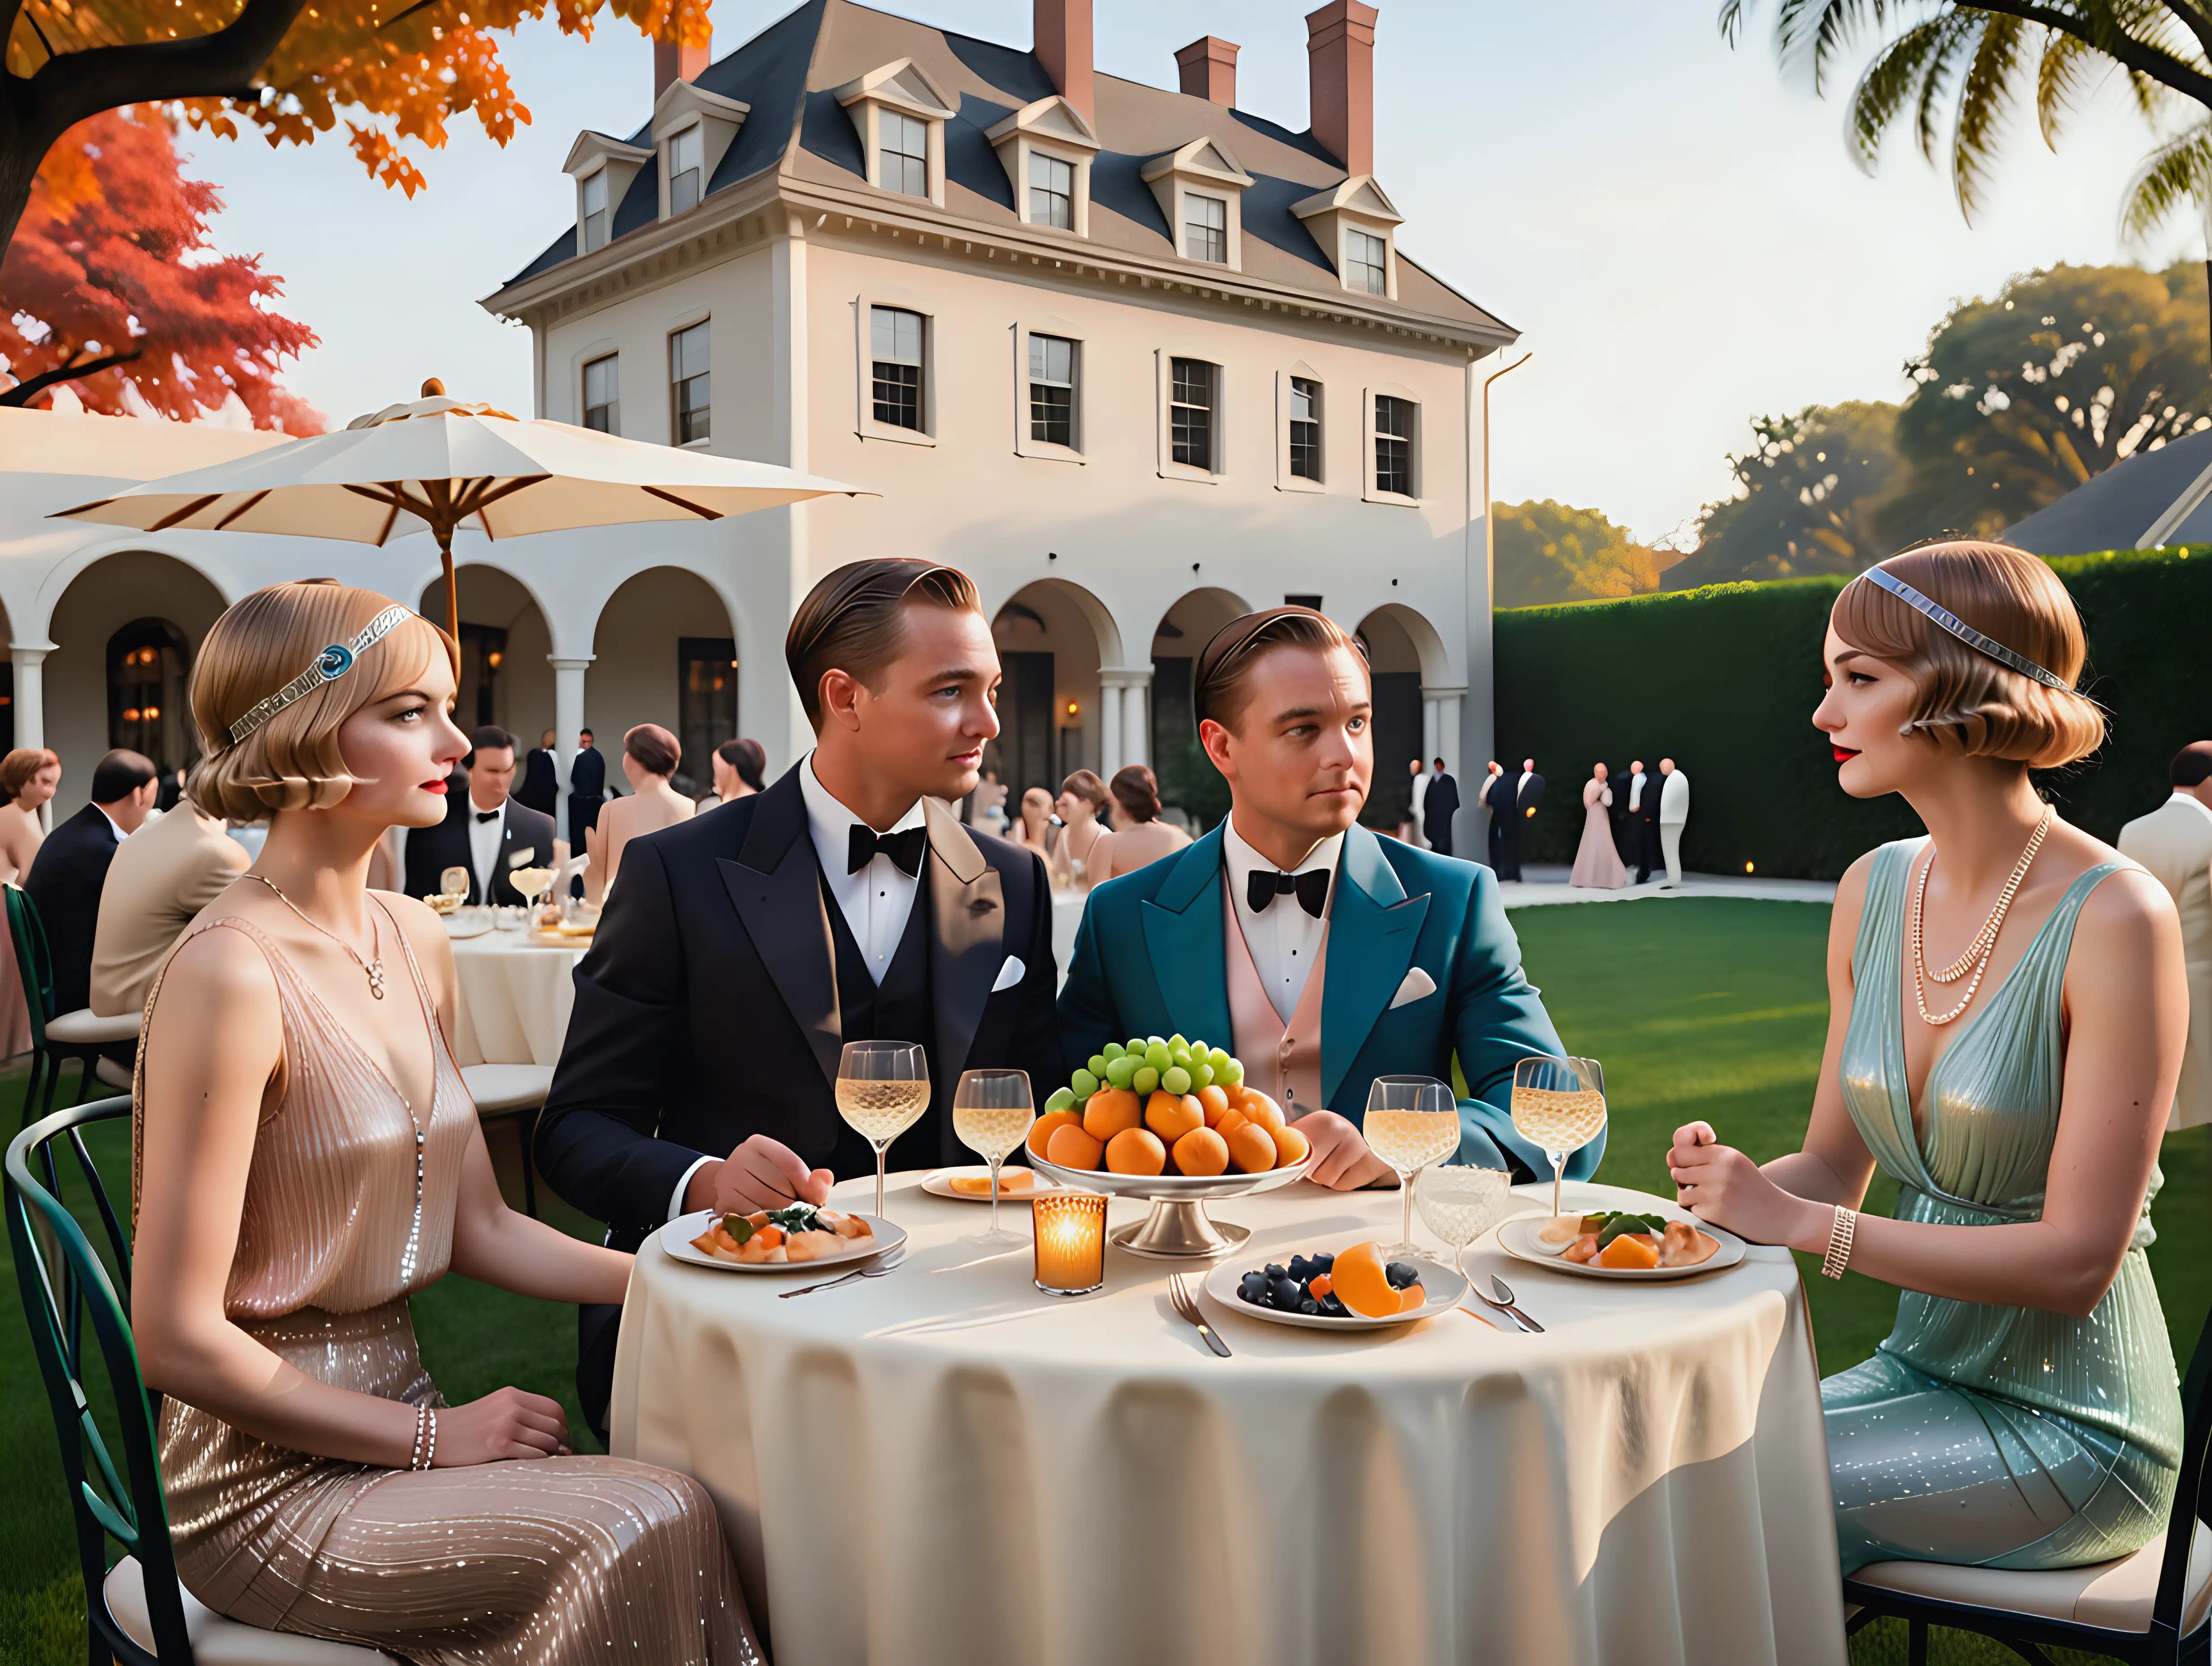 Elegant Outdoor Dinner Party at a GatsbyInspired Mansion